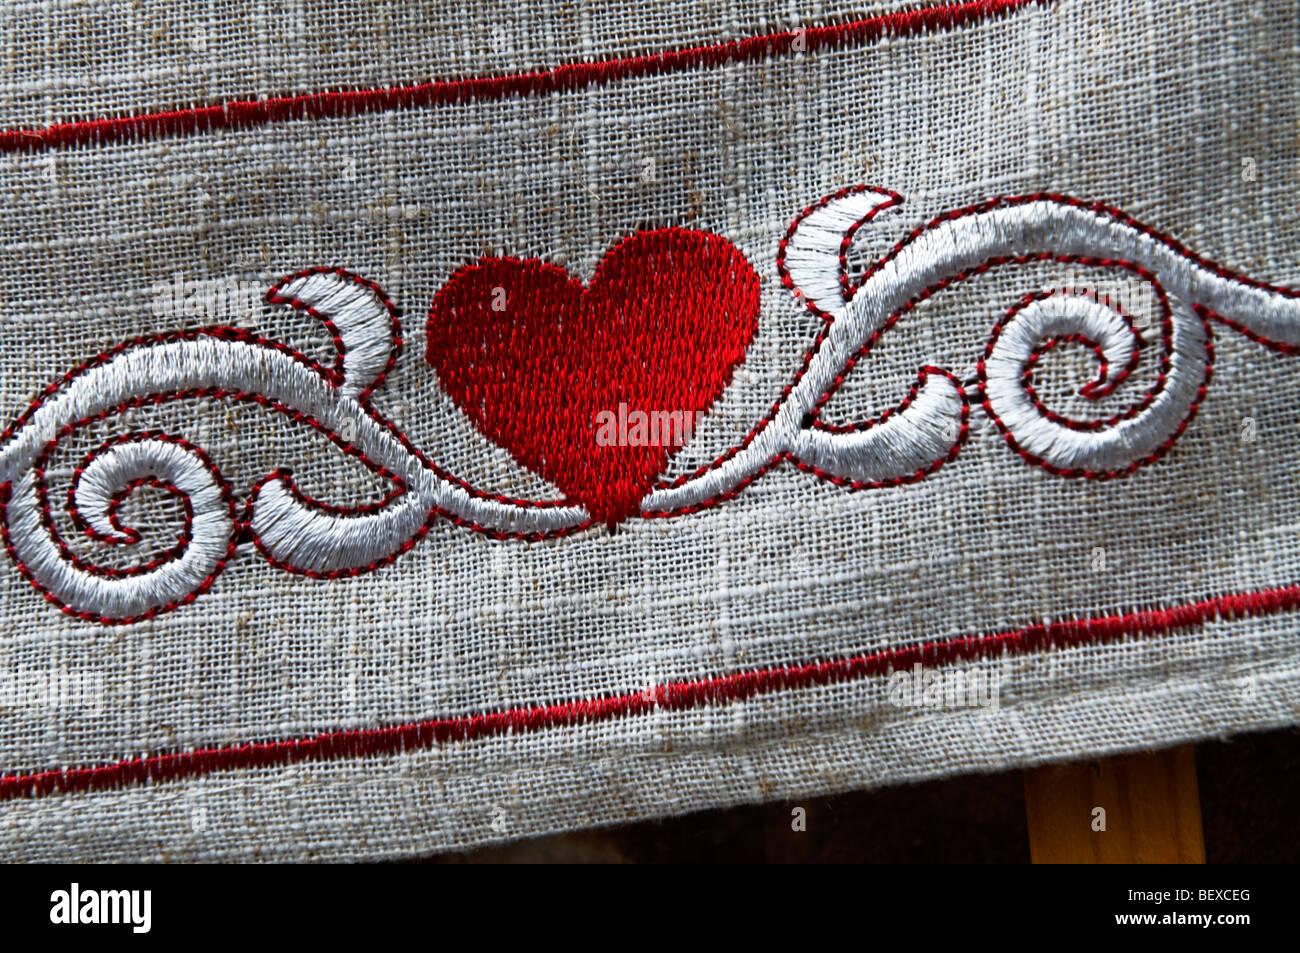 HEART LOVE EMBROIDERY FABRIC TEXTURE Close view on red heart embroidered on border of linen table cloth Stock Photo